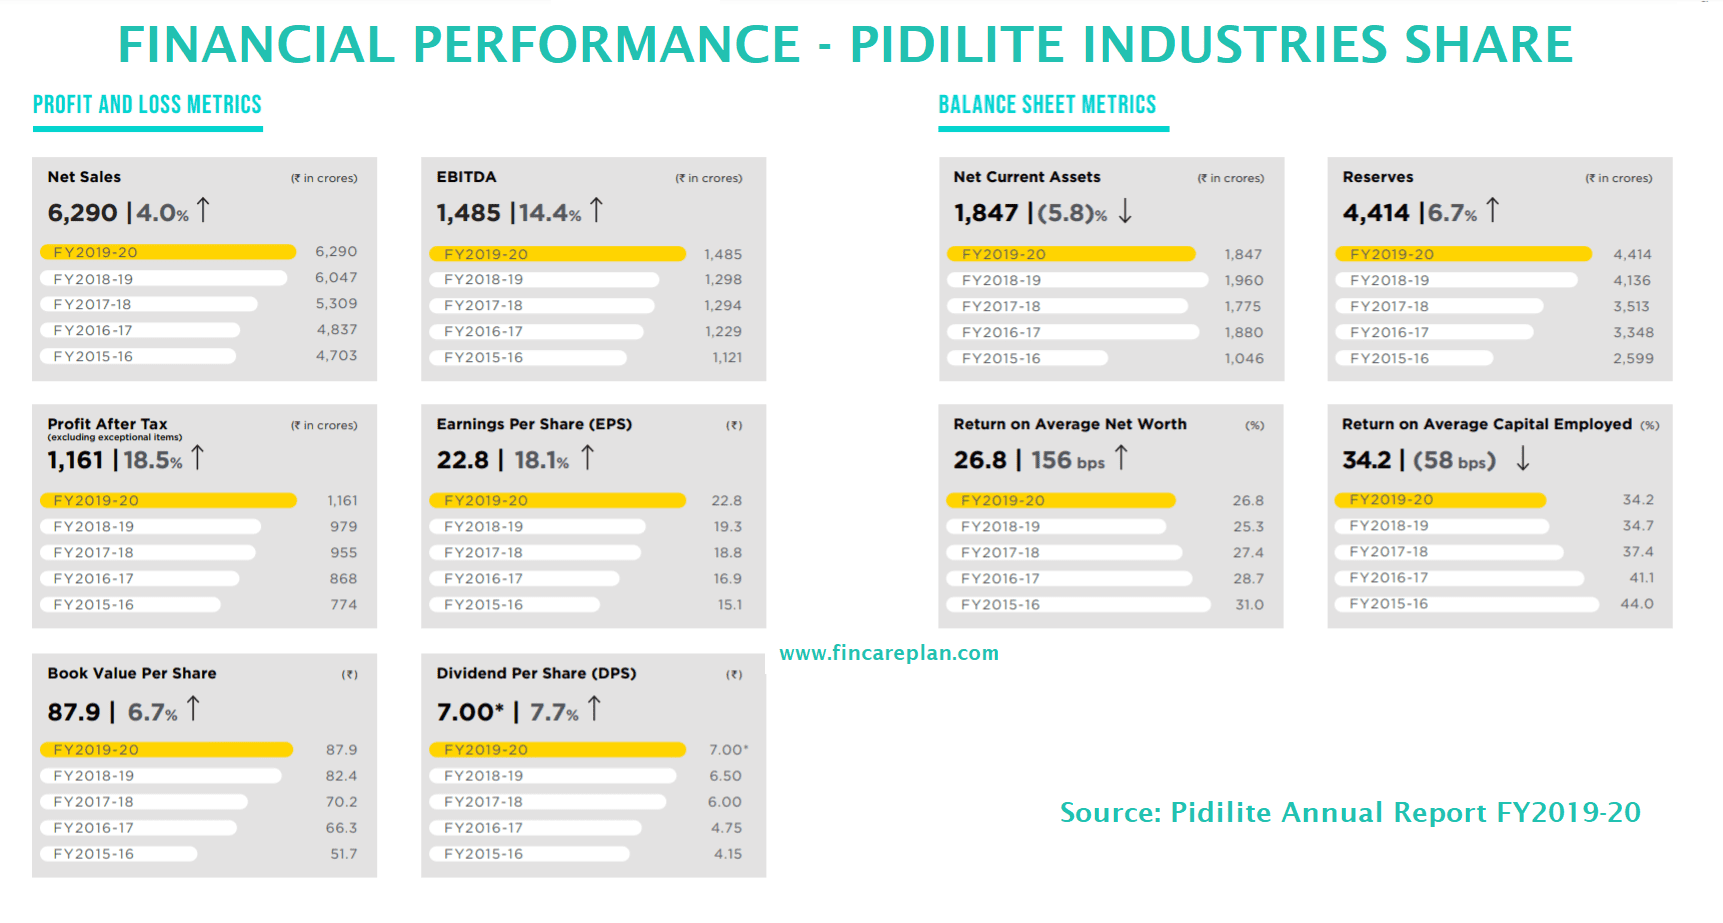 Financial Performance - Pidilite Industries Share